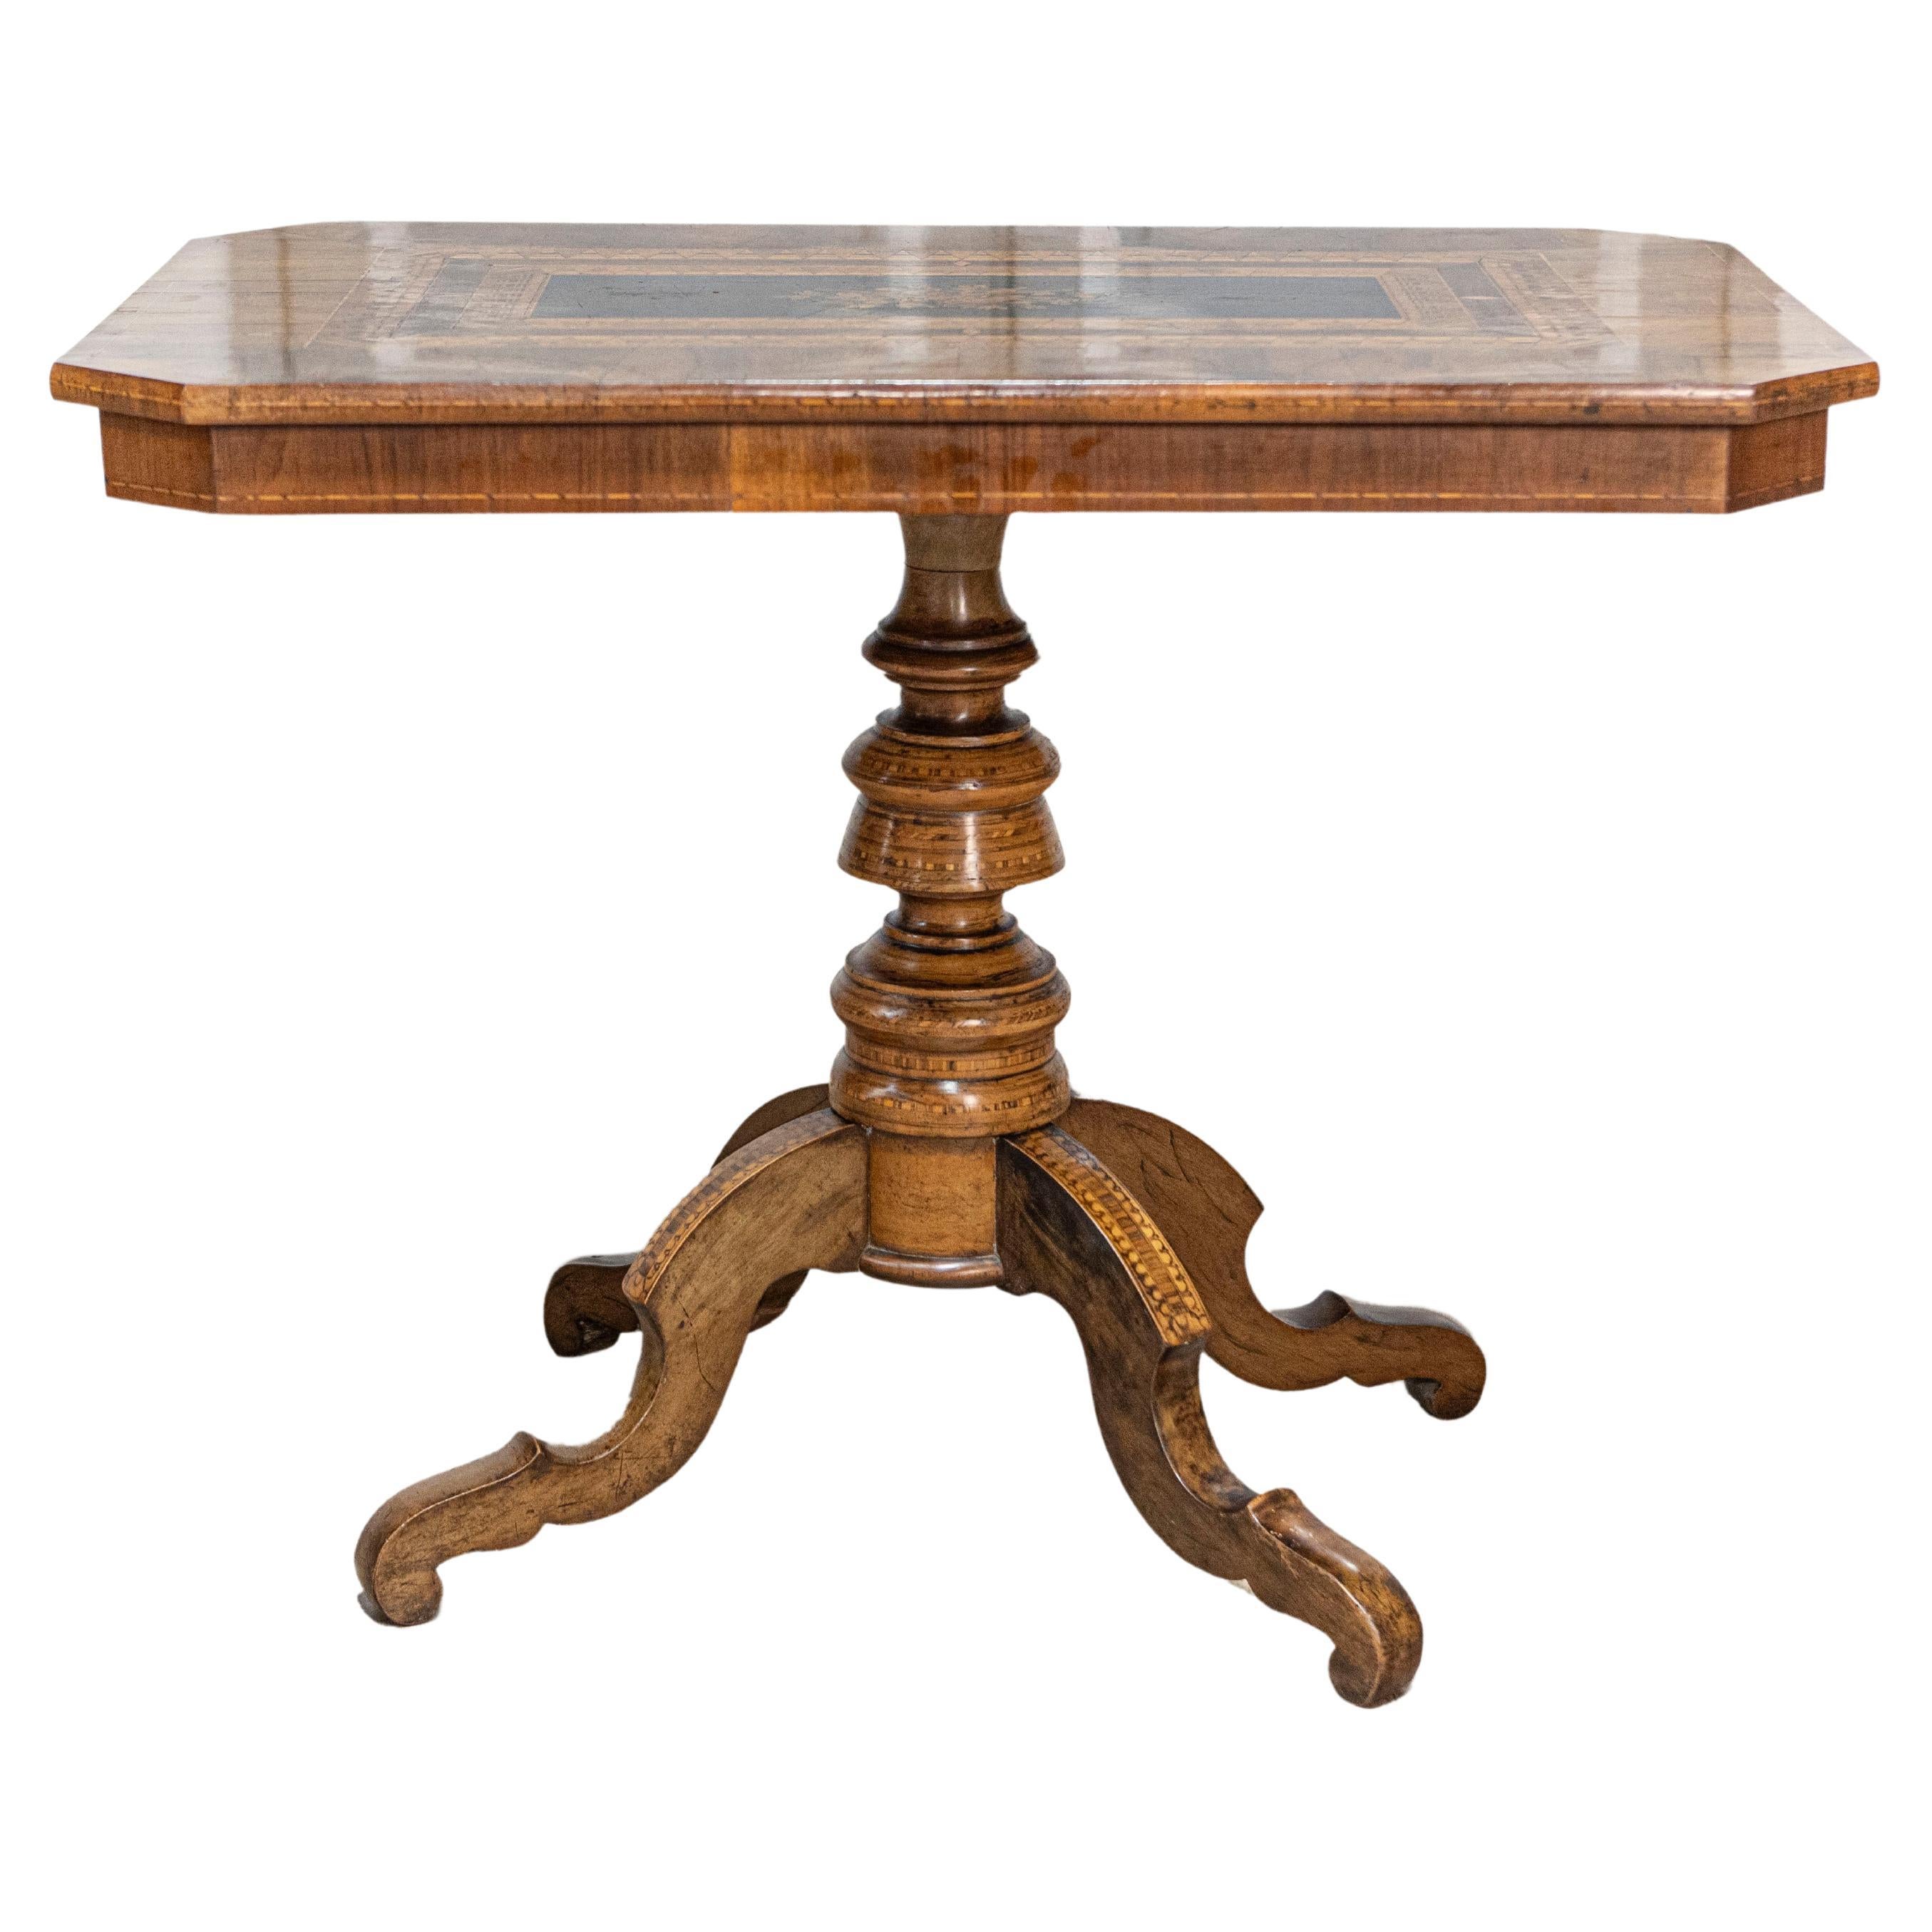 Italian 19th Century Walnut and Mahogany Center Table with Floral Marquetry